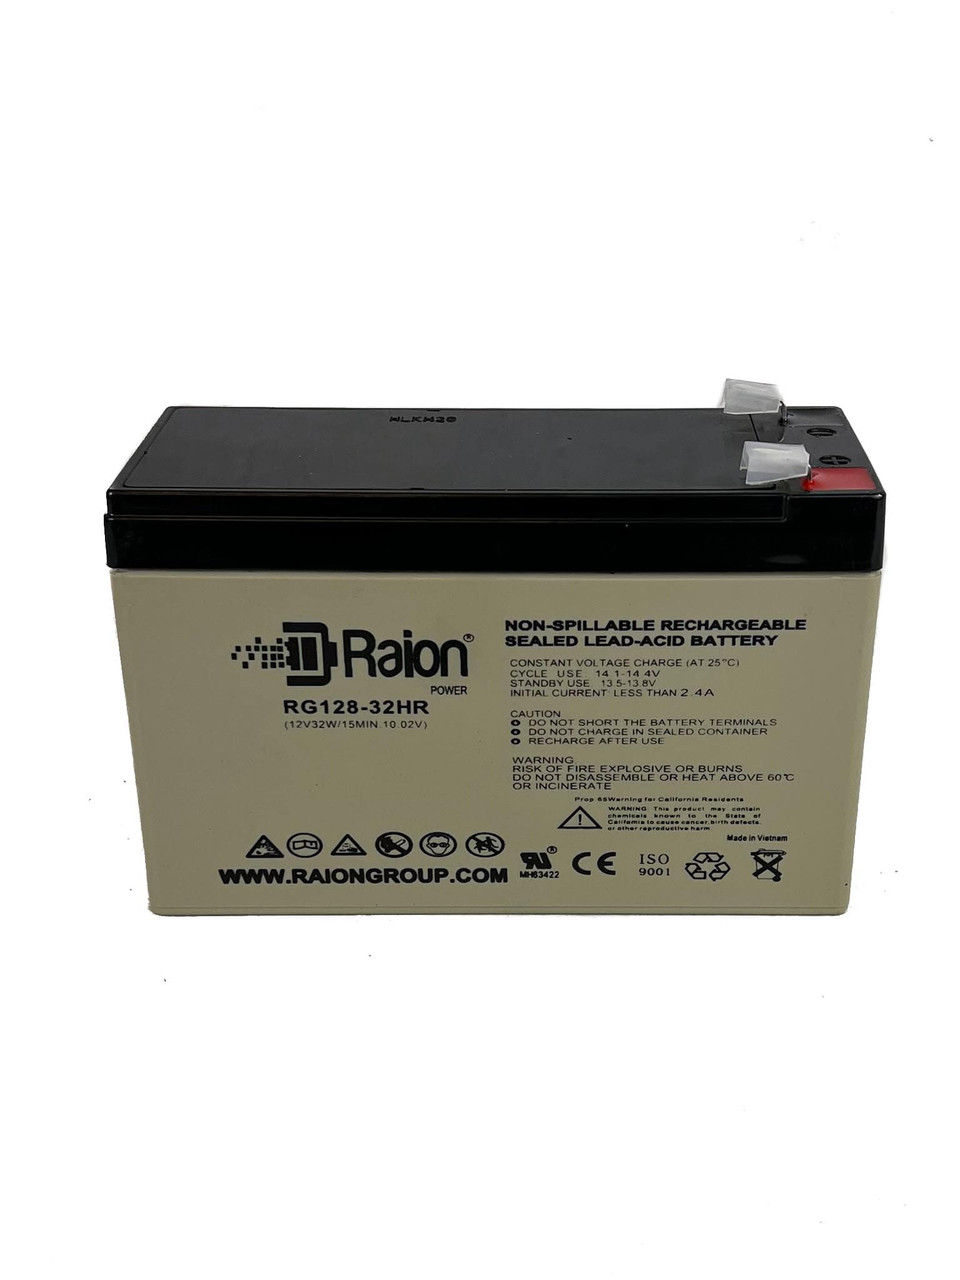 Raion Power RG128-32HR Replacement High Rate Battery Cartridge for APC SMART-UPS SP500DR